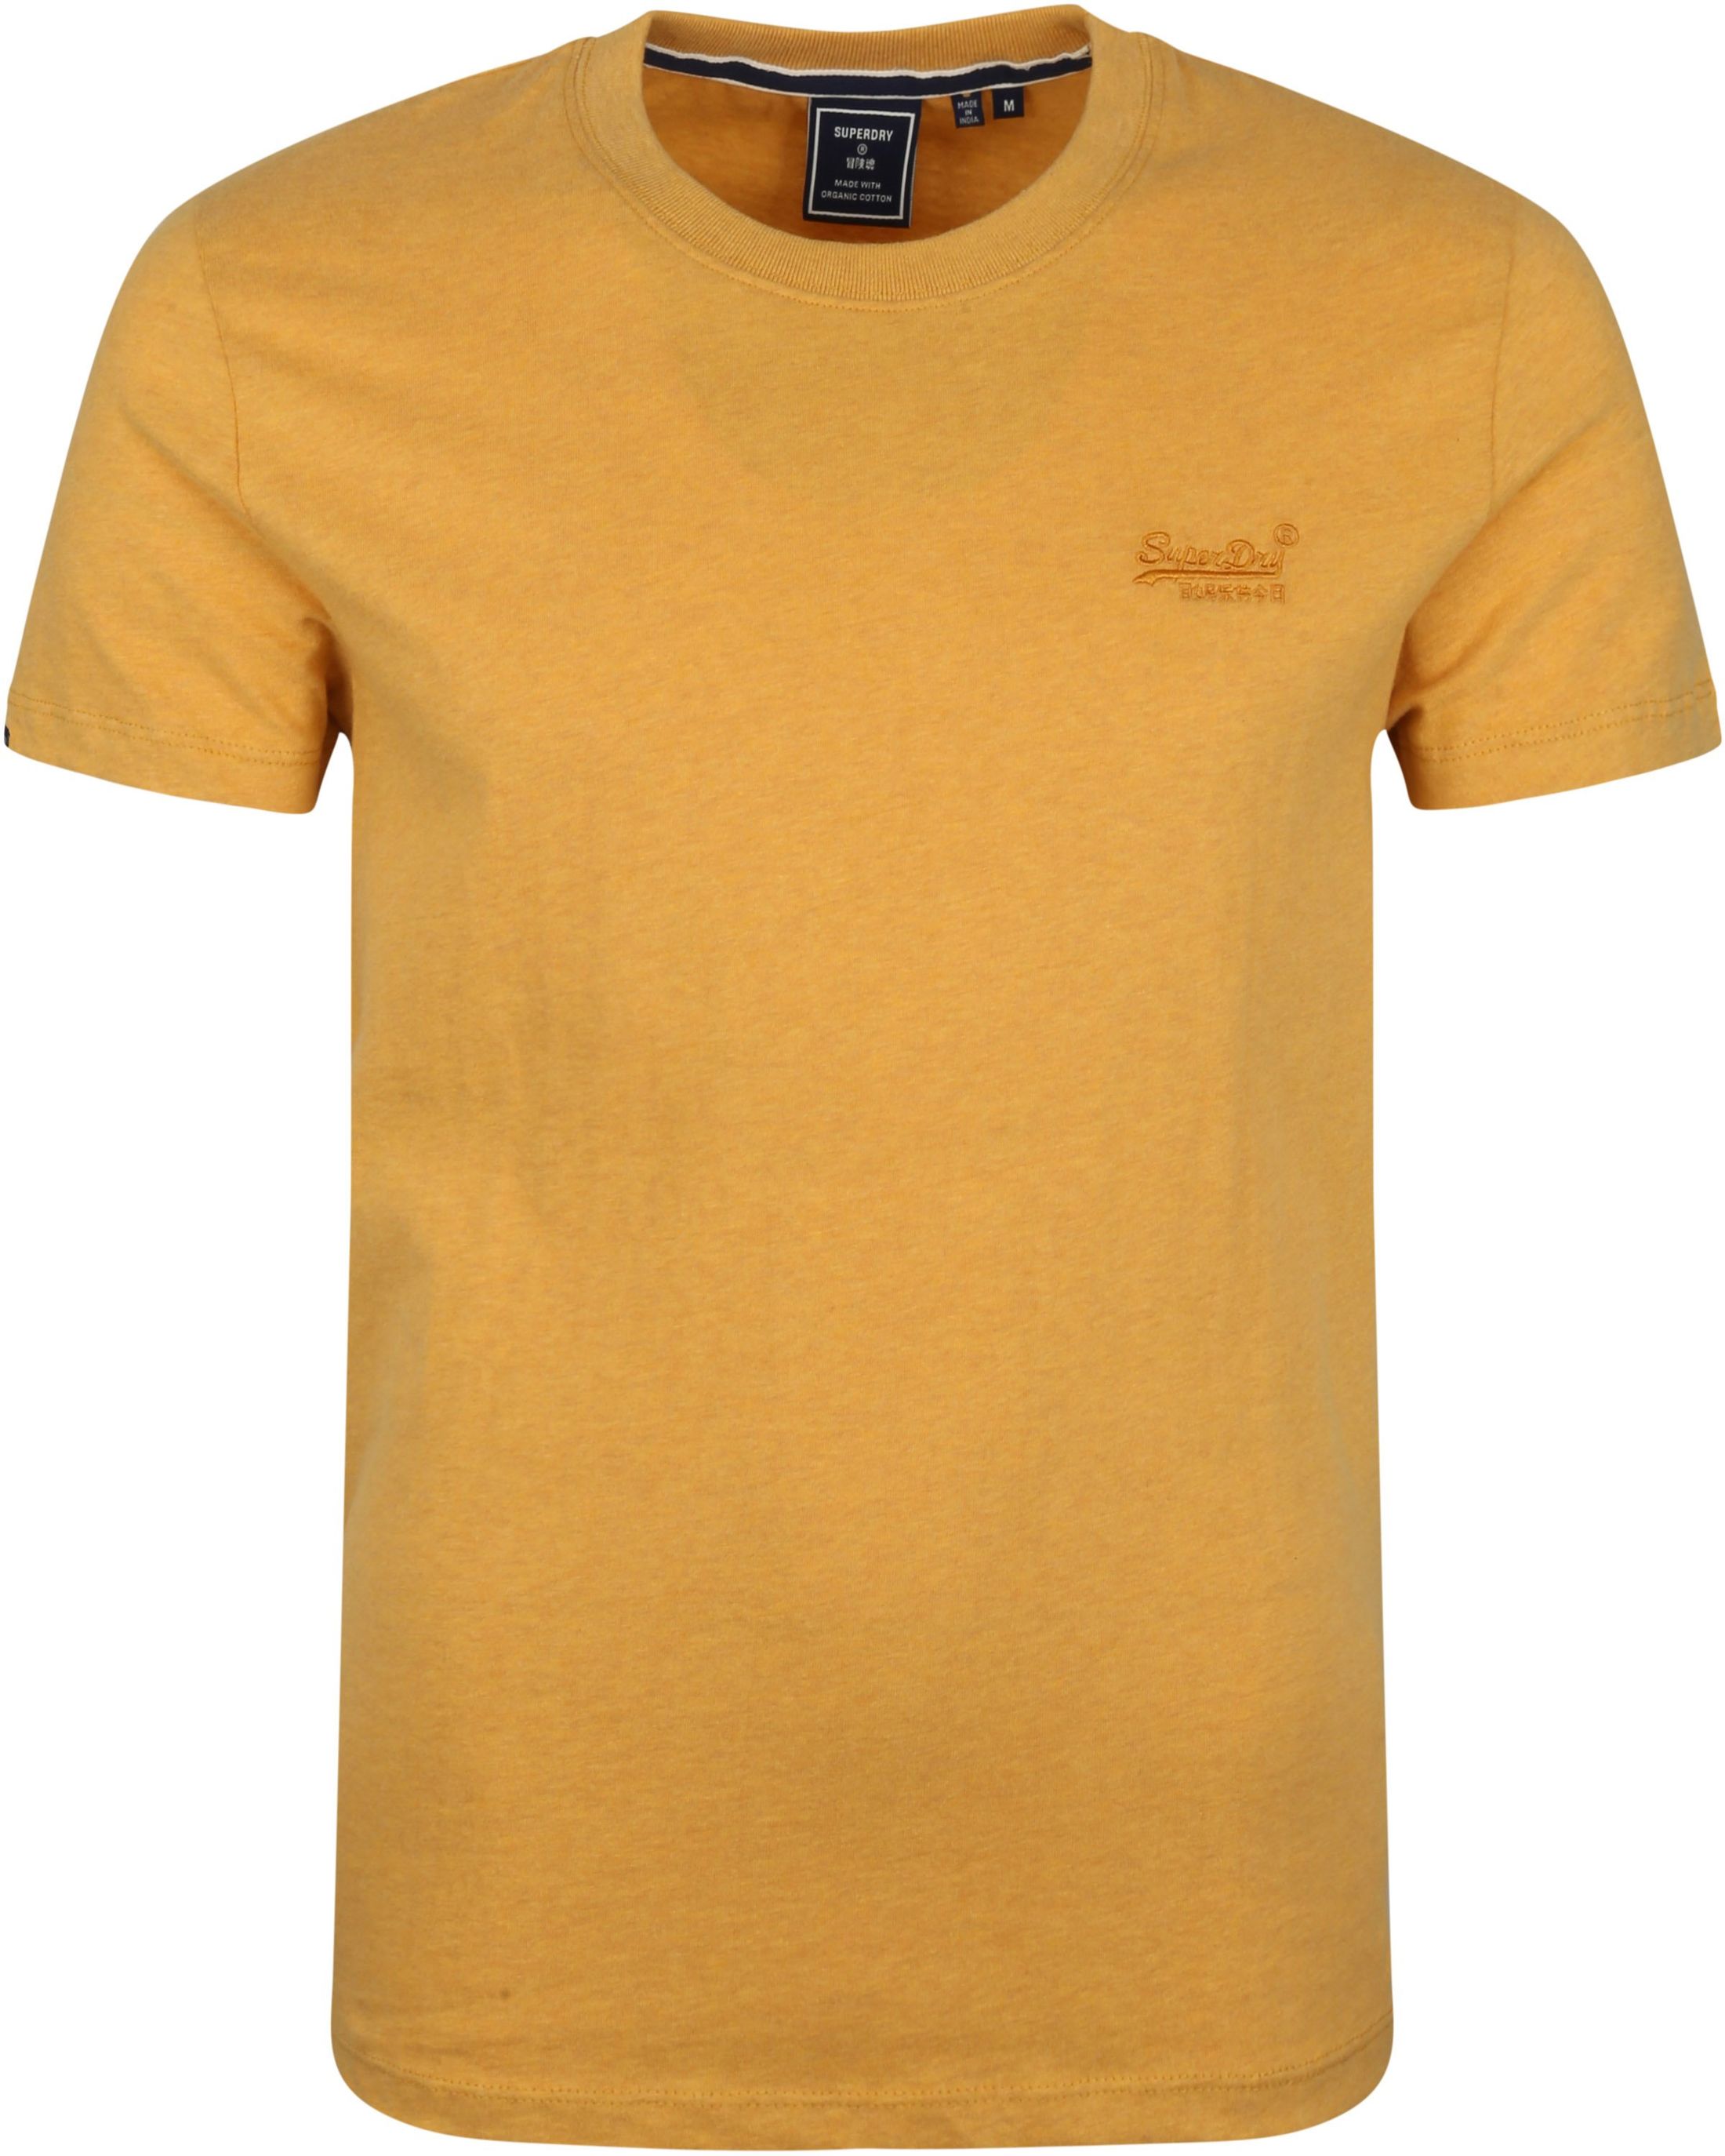 Superdry Classic T Shirt Yellow size L